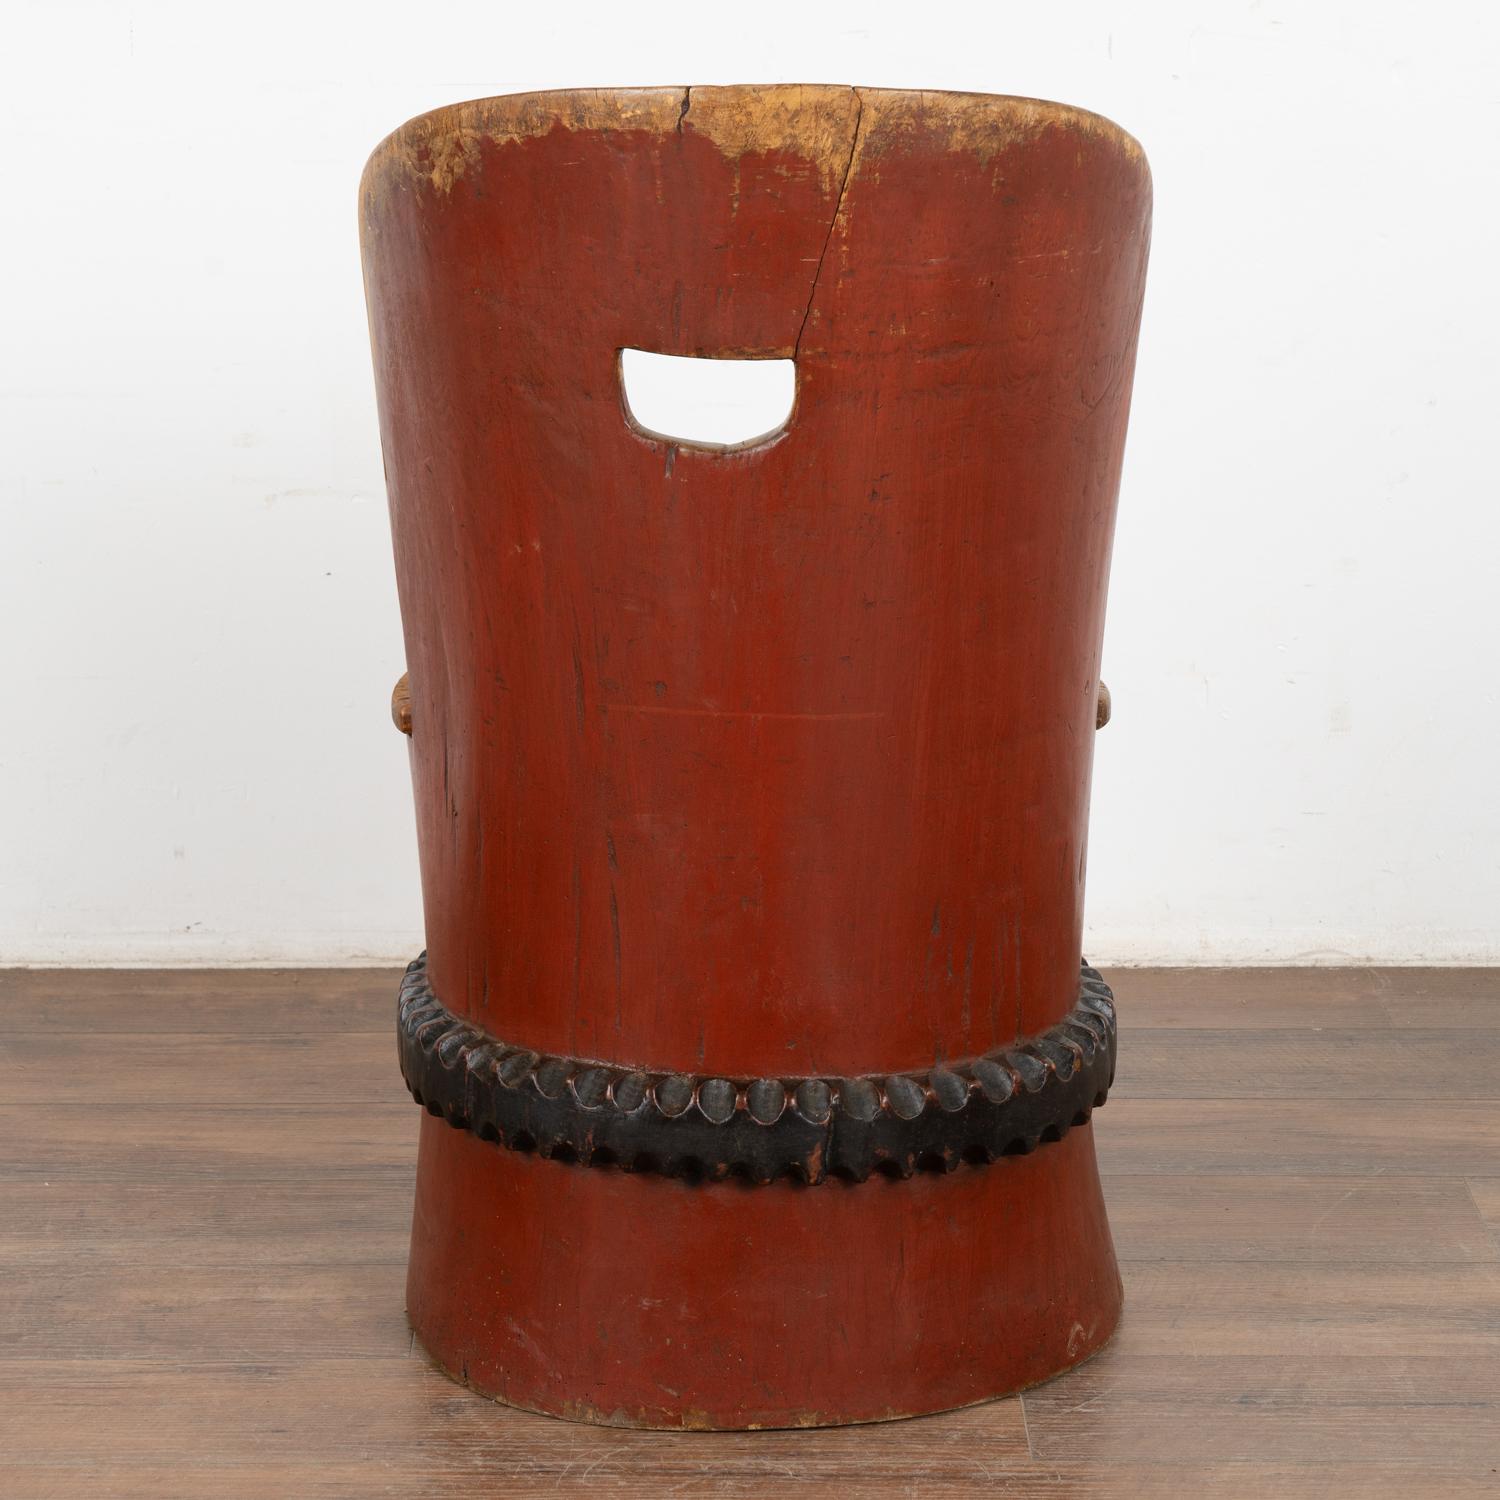 Original Red Painted Kubbestol Log Chair, Sweden circa 1860-80 For Sale 2